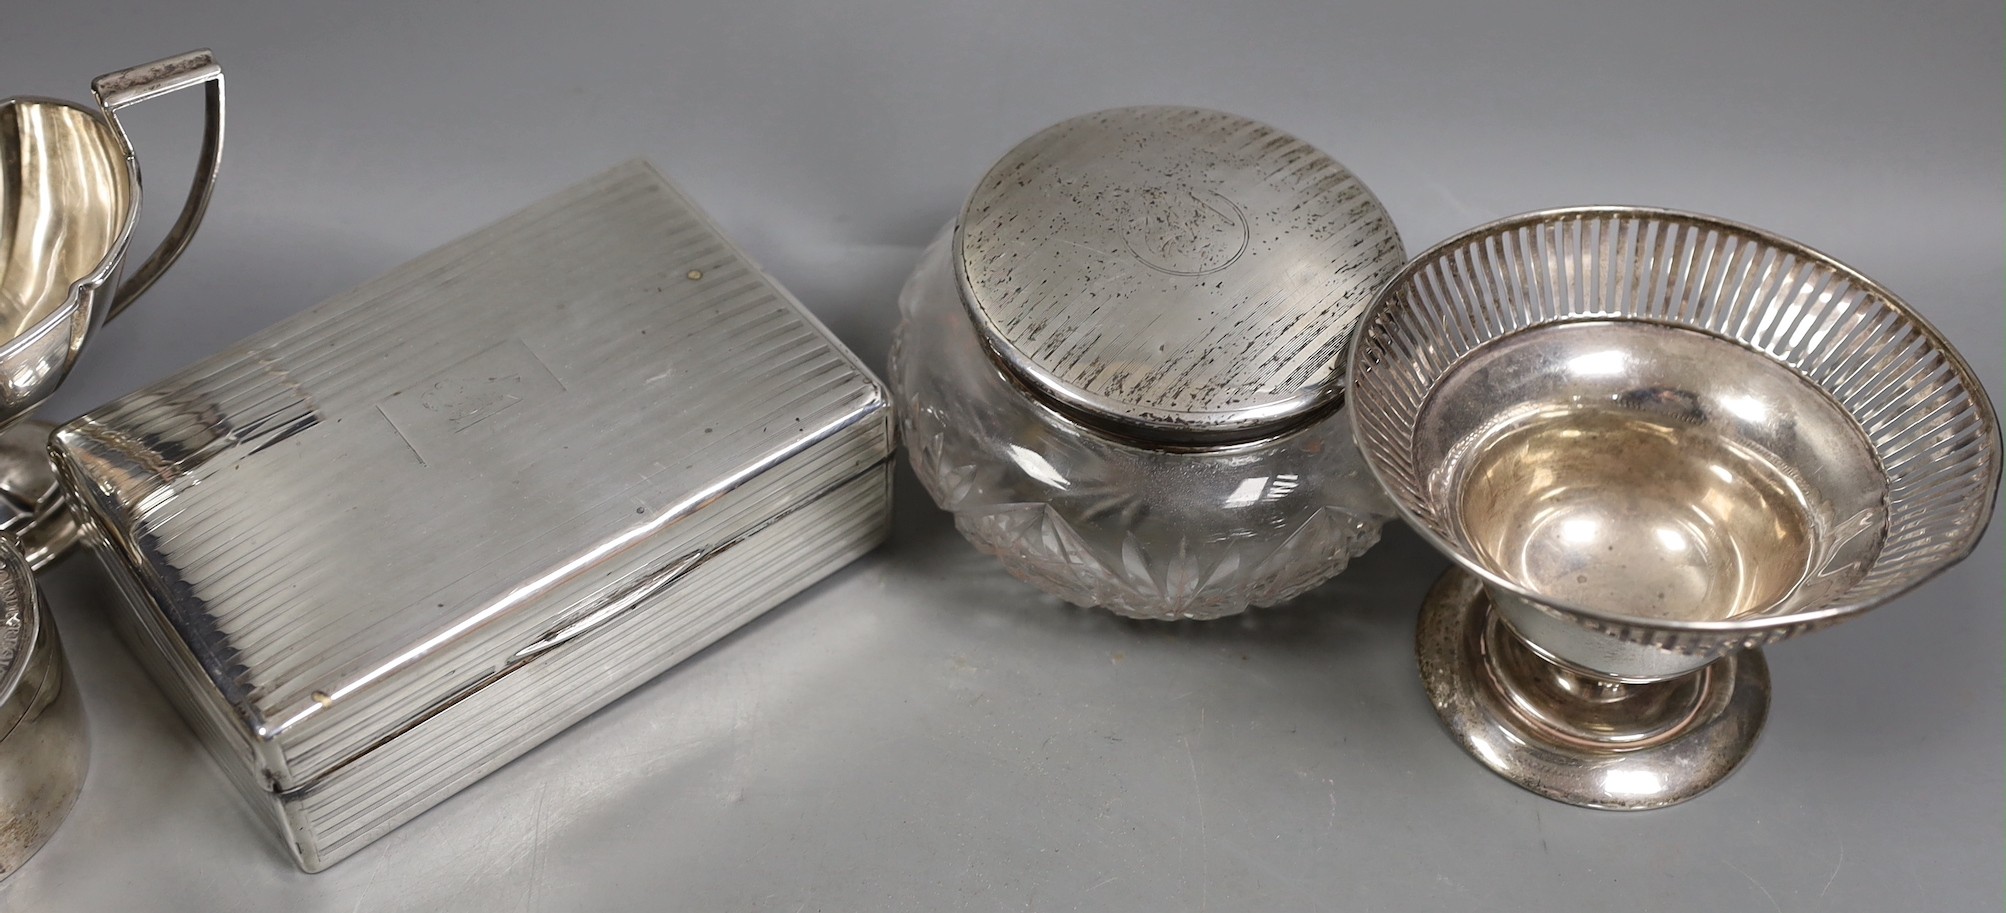 Miscellaneous silver ware including a mounted cigarette box, mounted posy vase, egg cup stand, late Victorian circular box and cover, repousse dish, eight sterling items including flatware and three other items.